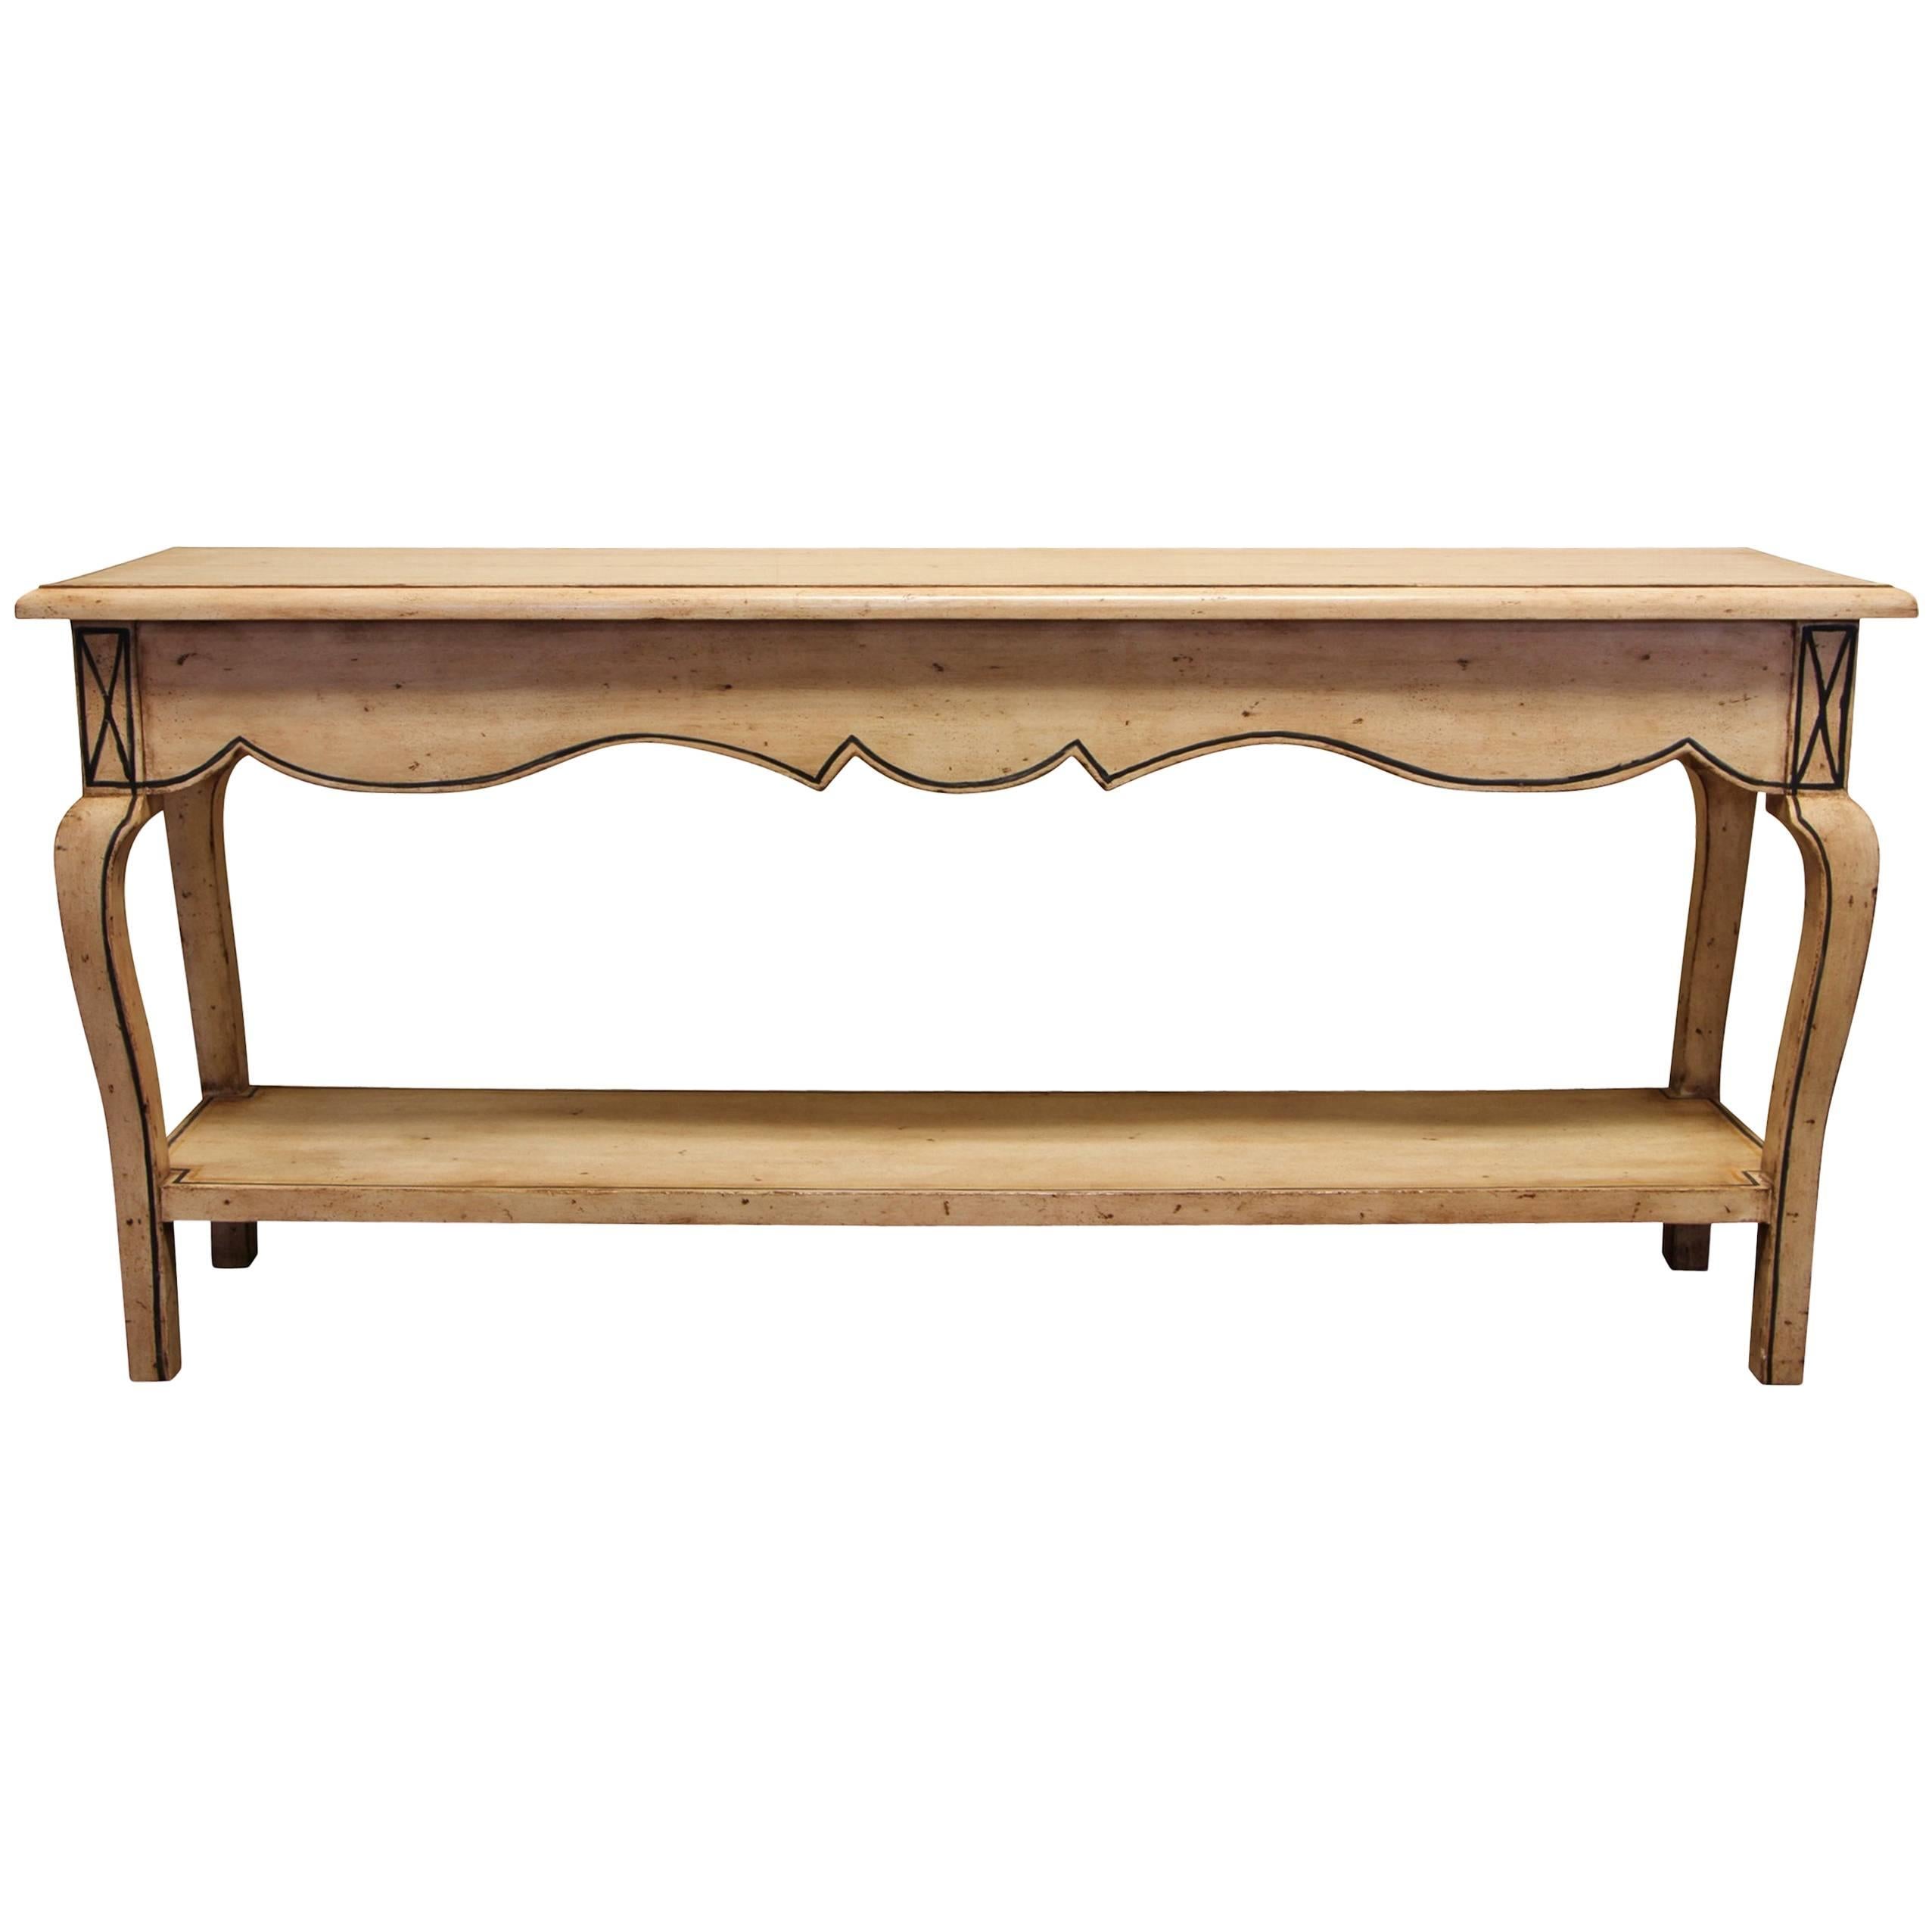 Country French Style Console by Guy Chaddock